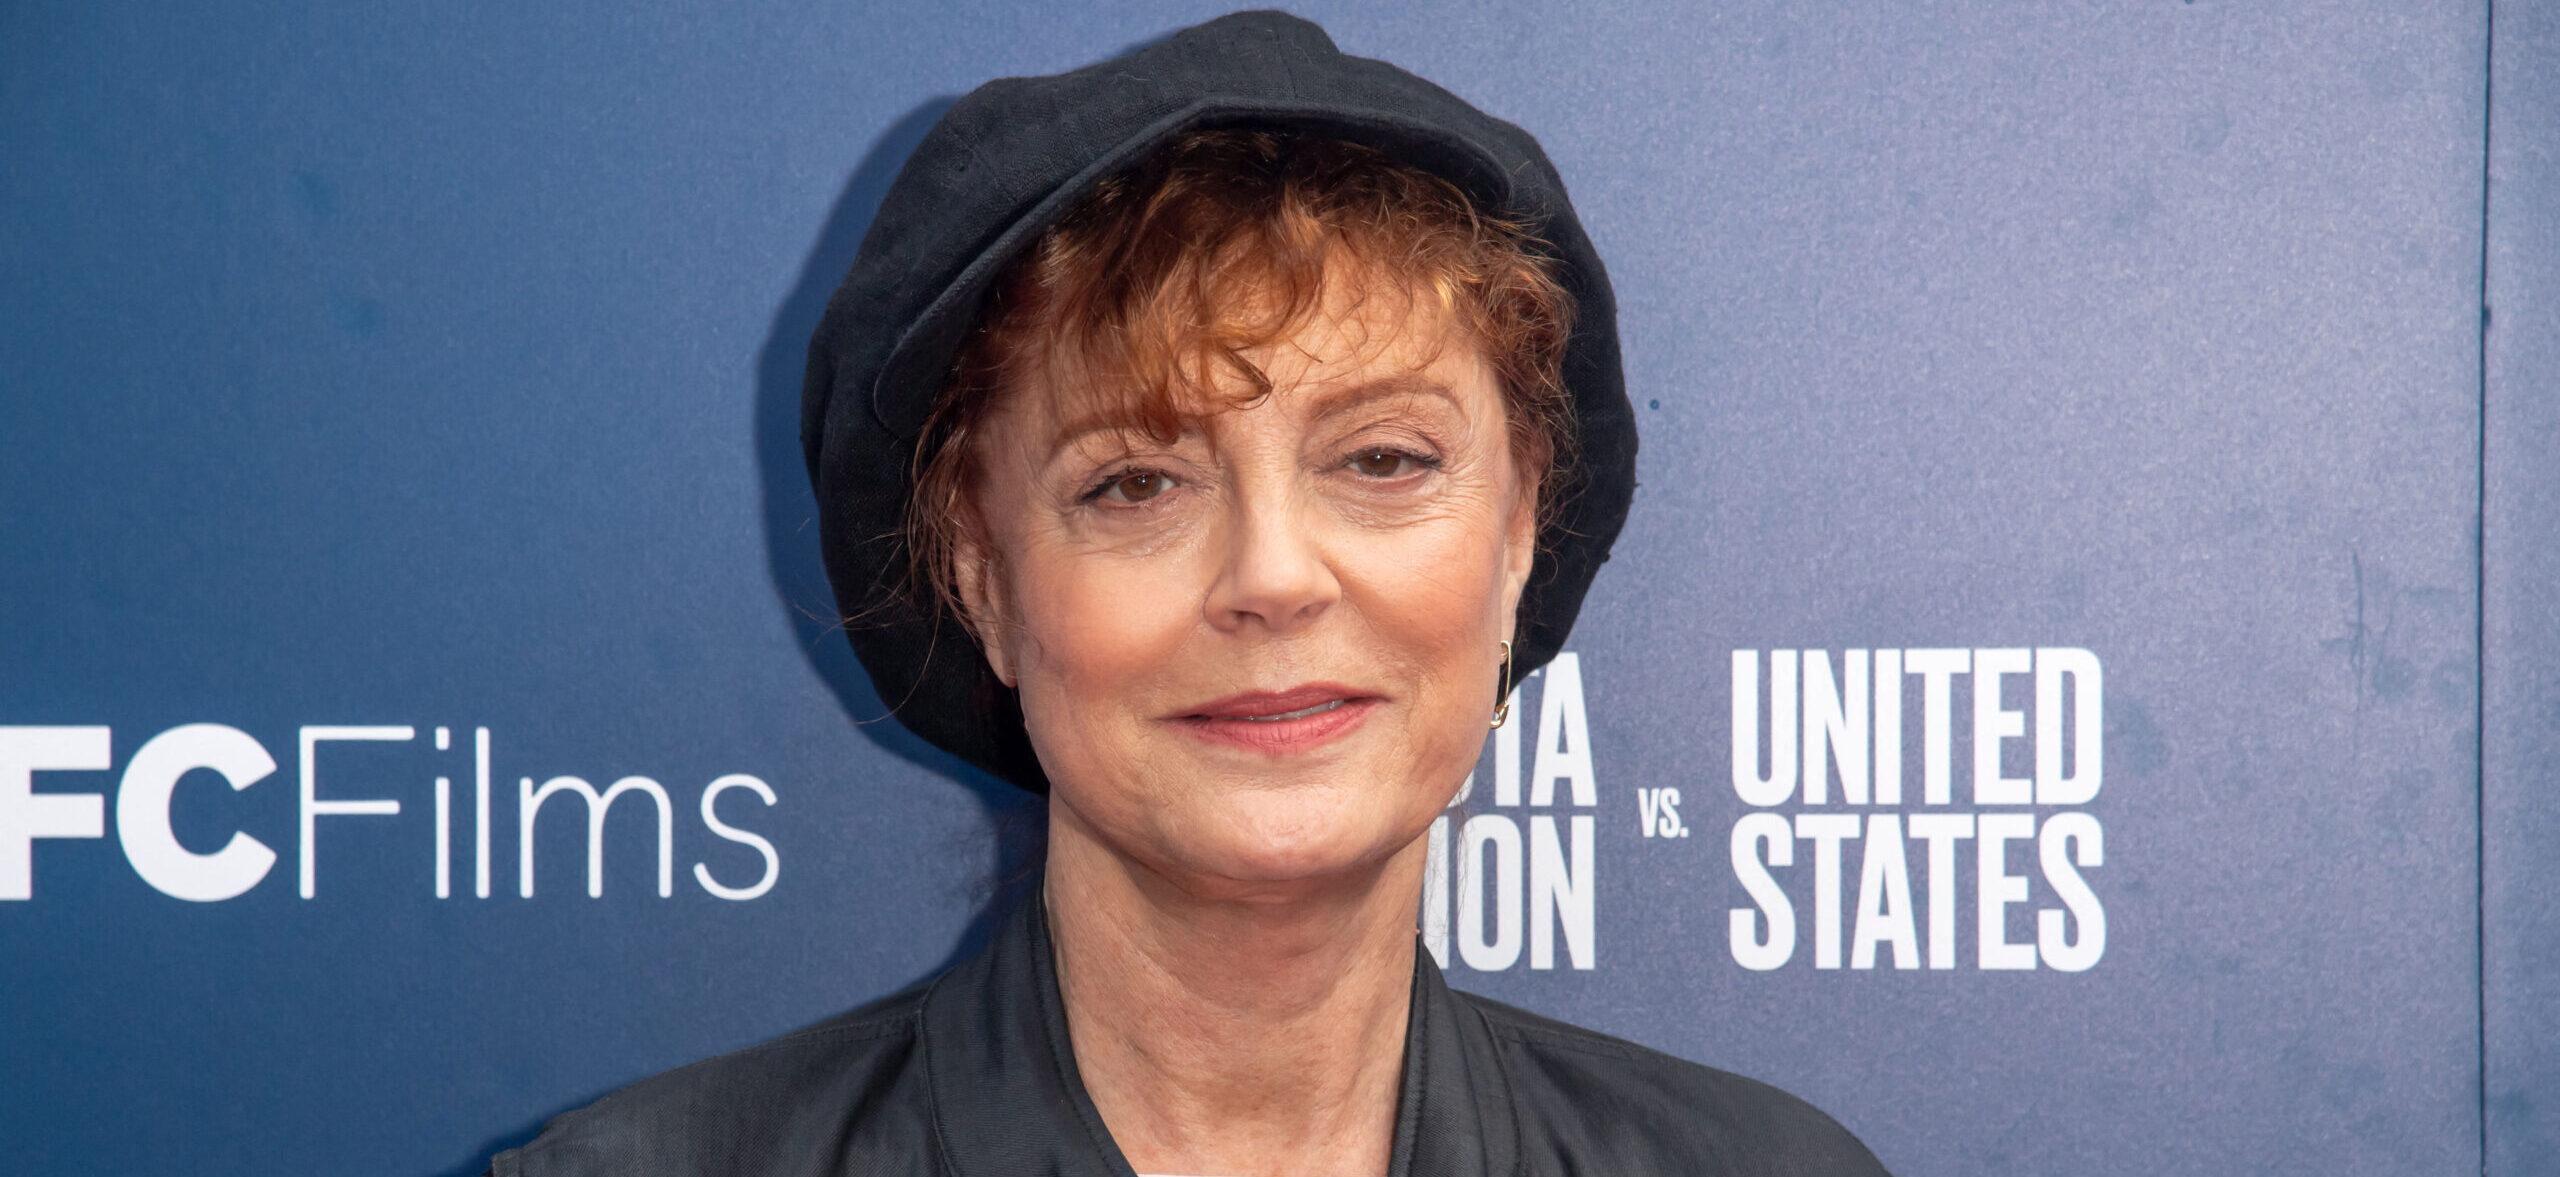 Susan Sarandon’s Son Wants Her ‘Honkers’ Offline Amid Agency Fallout